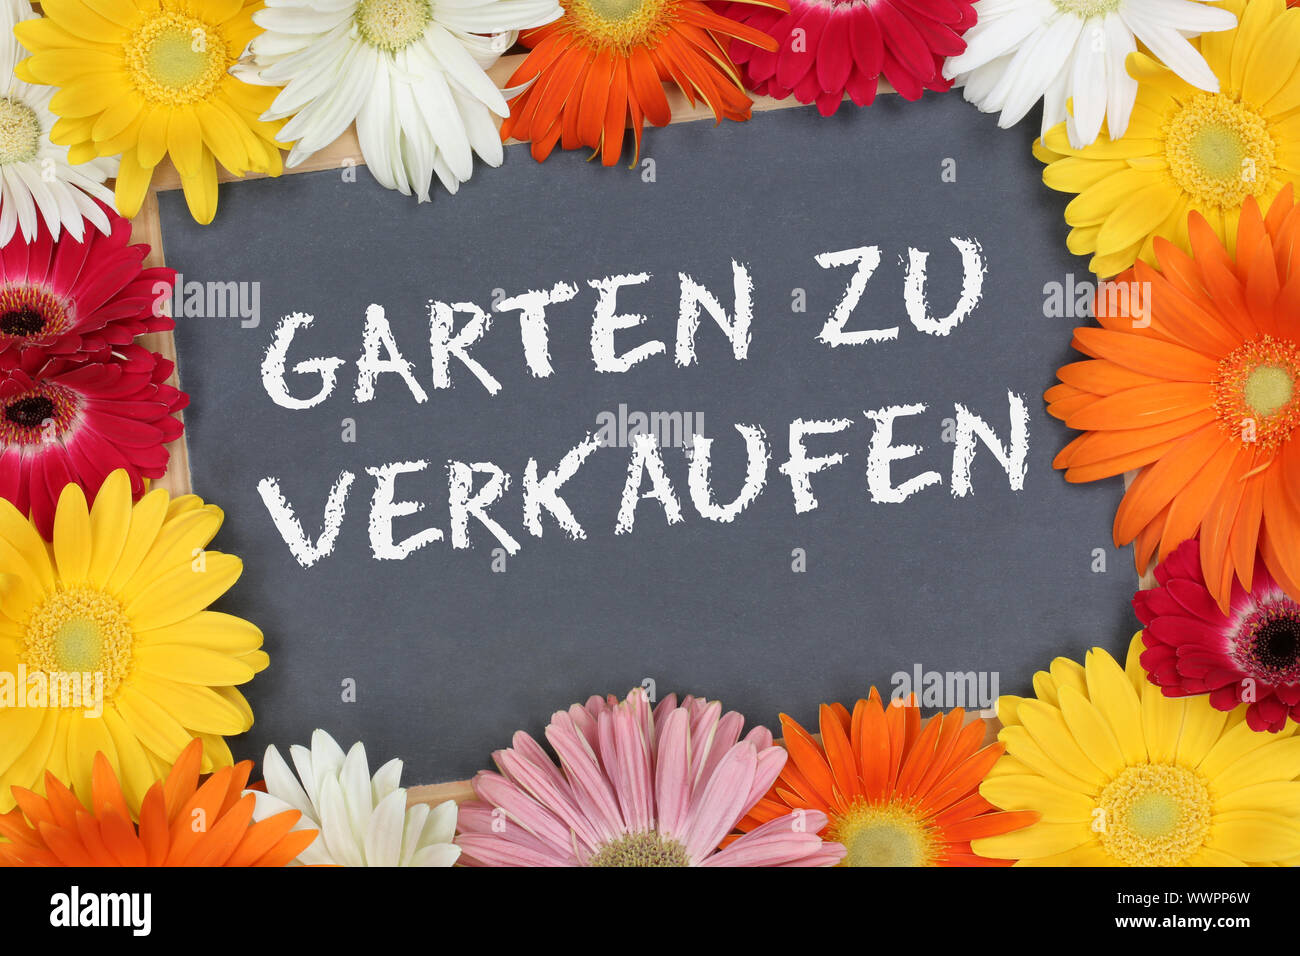 Garden for sale sale with colorful flowers flower shield Stock Photo